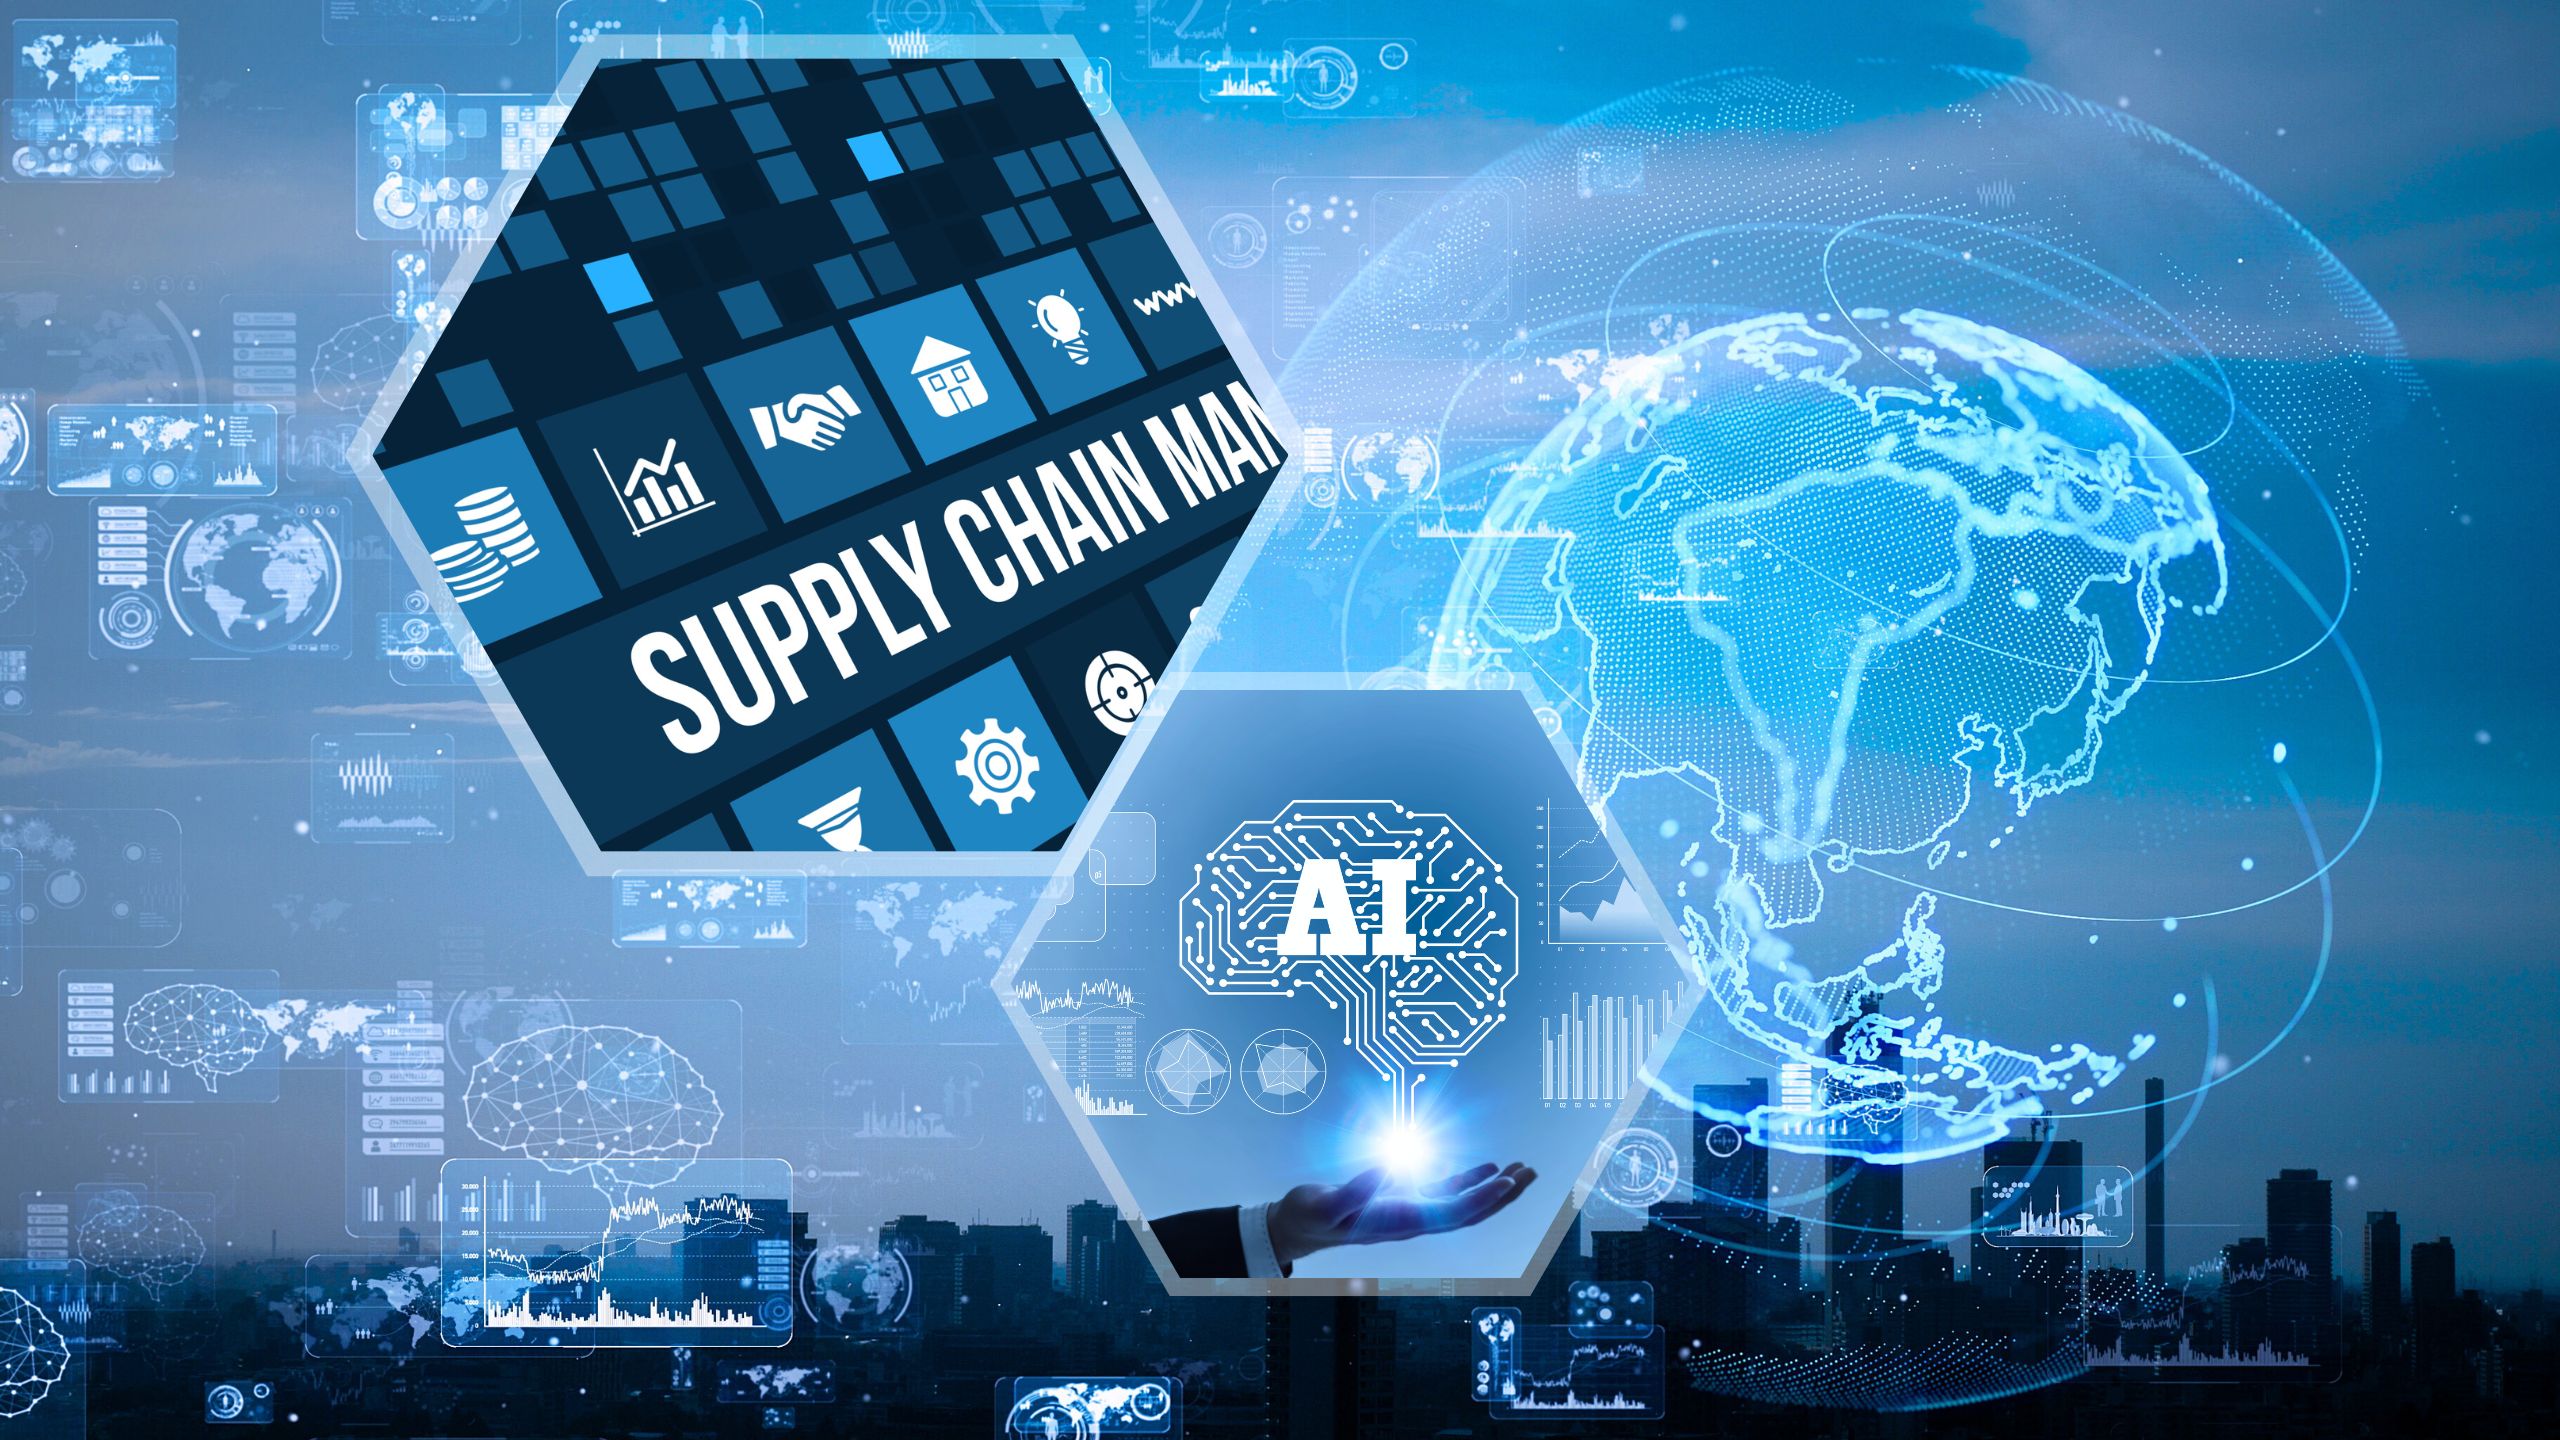 AI-Powered logistics firm Gently launches in Los Angeles with Decentralized Supply Chain